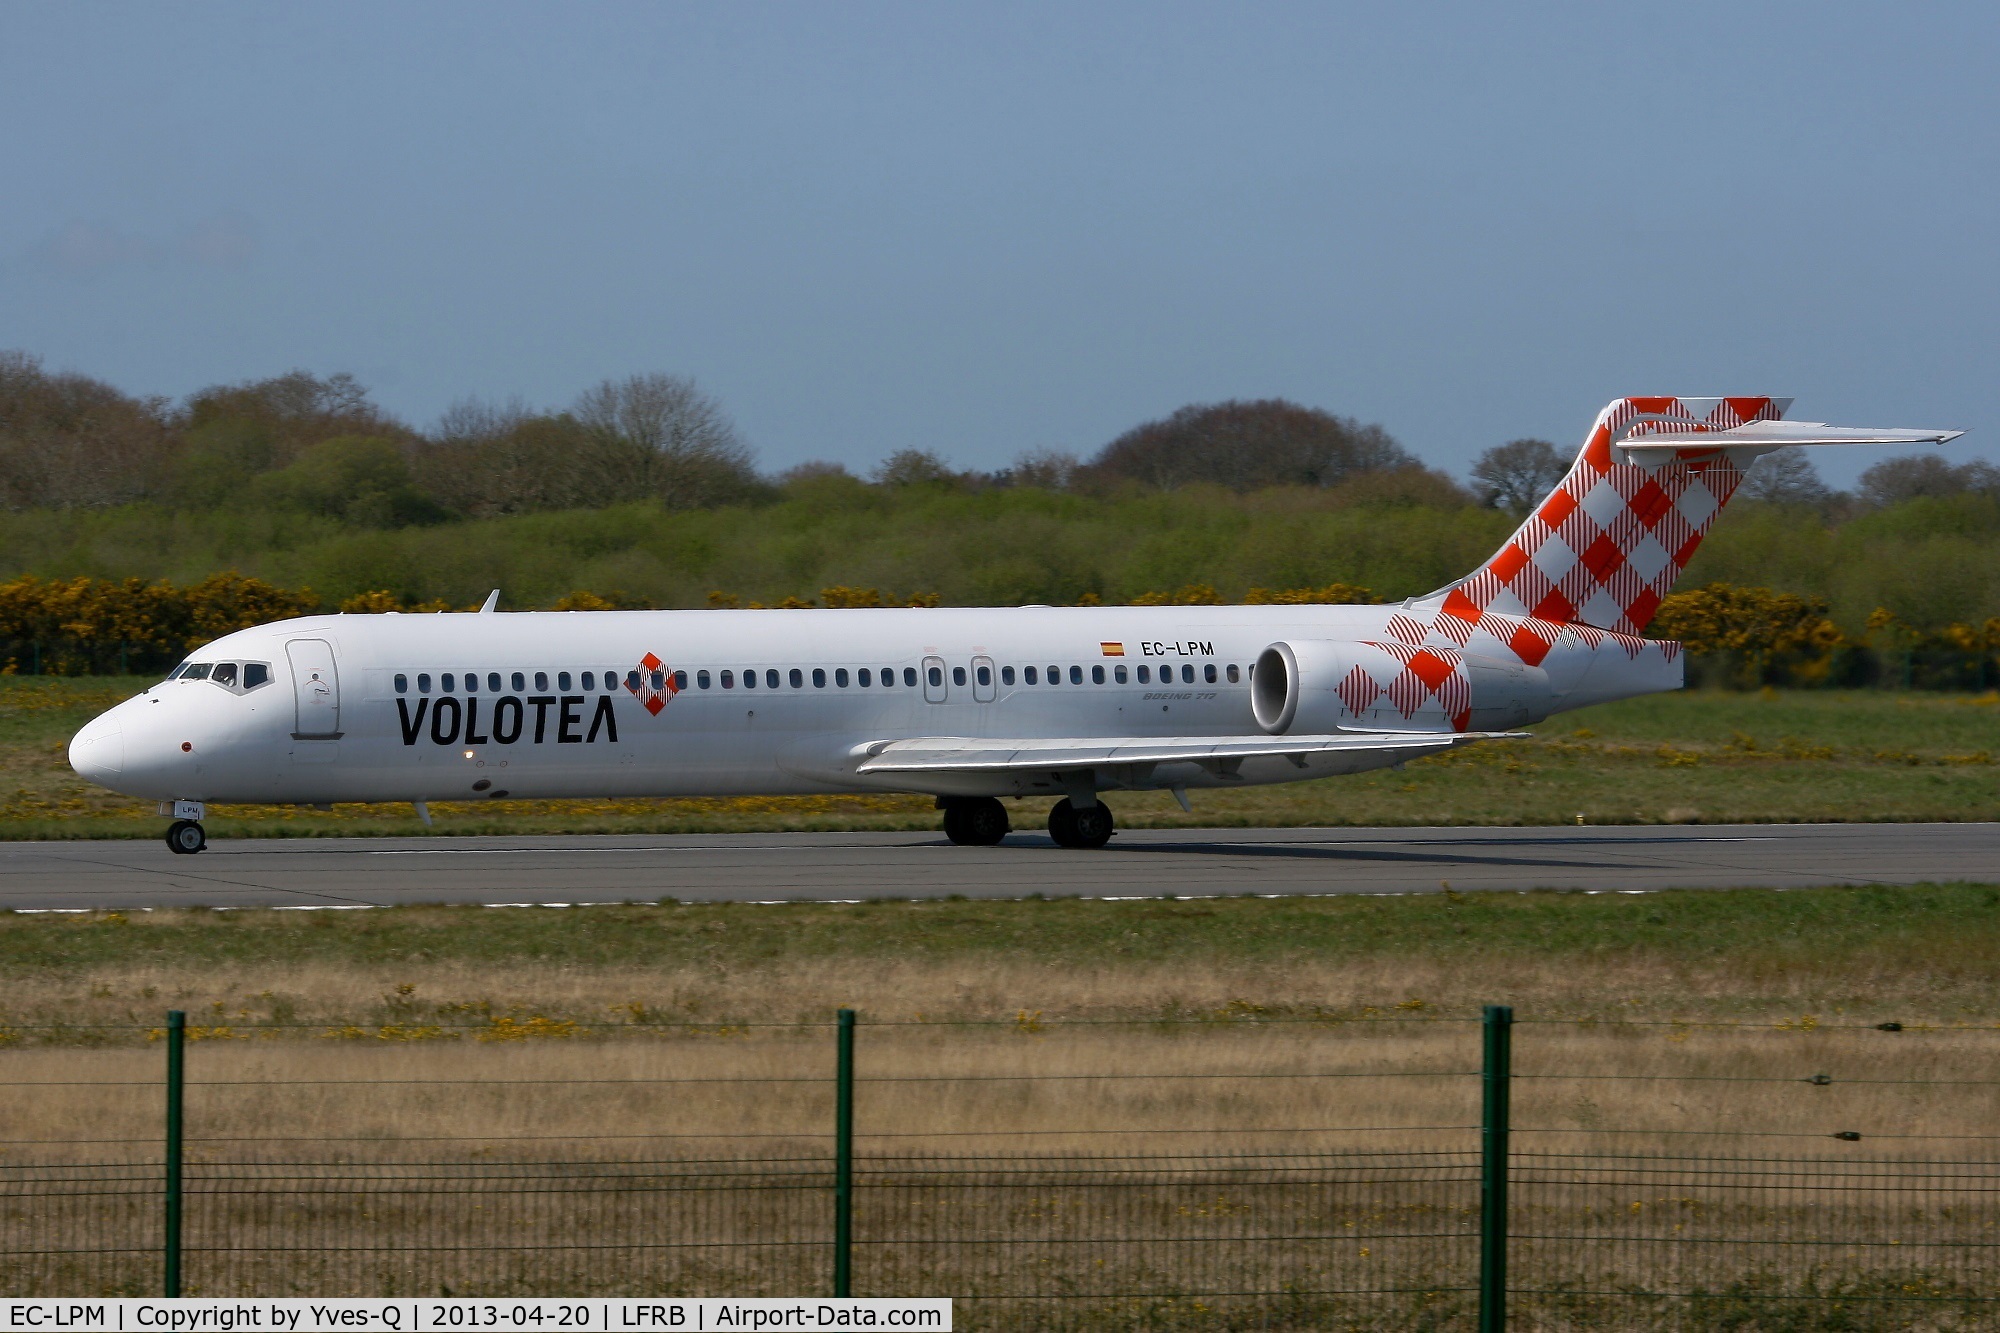 EC-LPM, 2005 Boeing 717-2BL C/N 55185, Boeing 717-2BL, Taxiing to holding point Rwy 07R, Brest-Bretagne Airport (LFRB-BES)